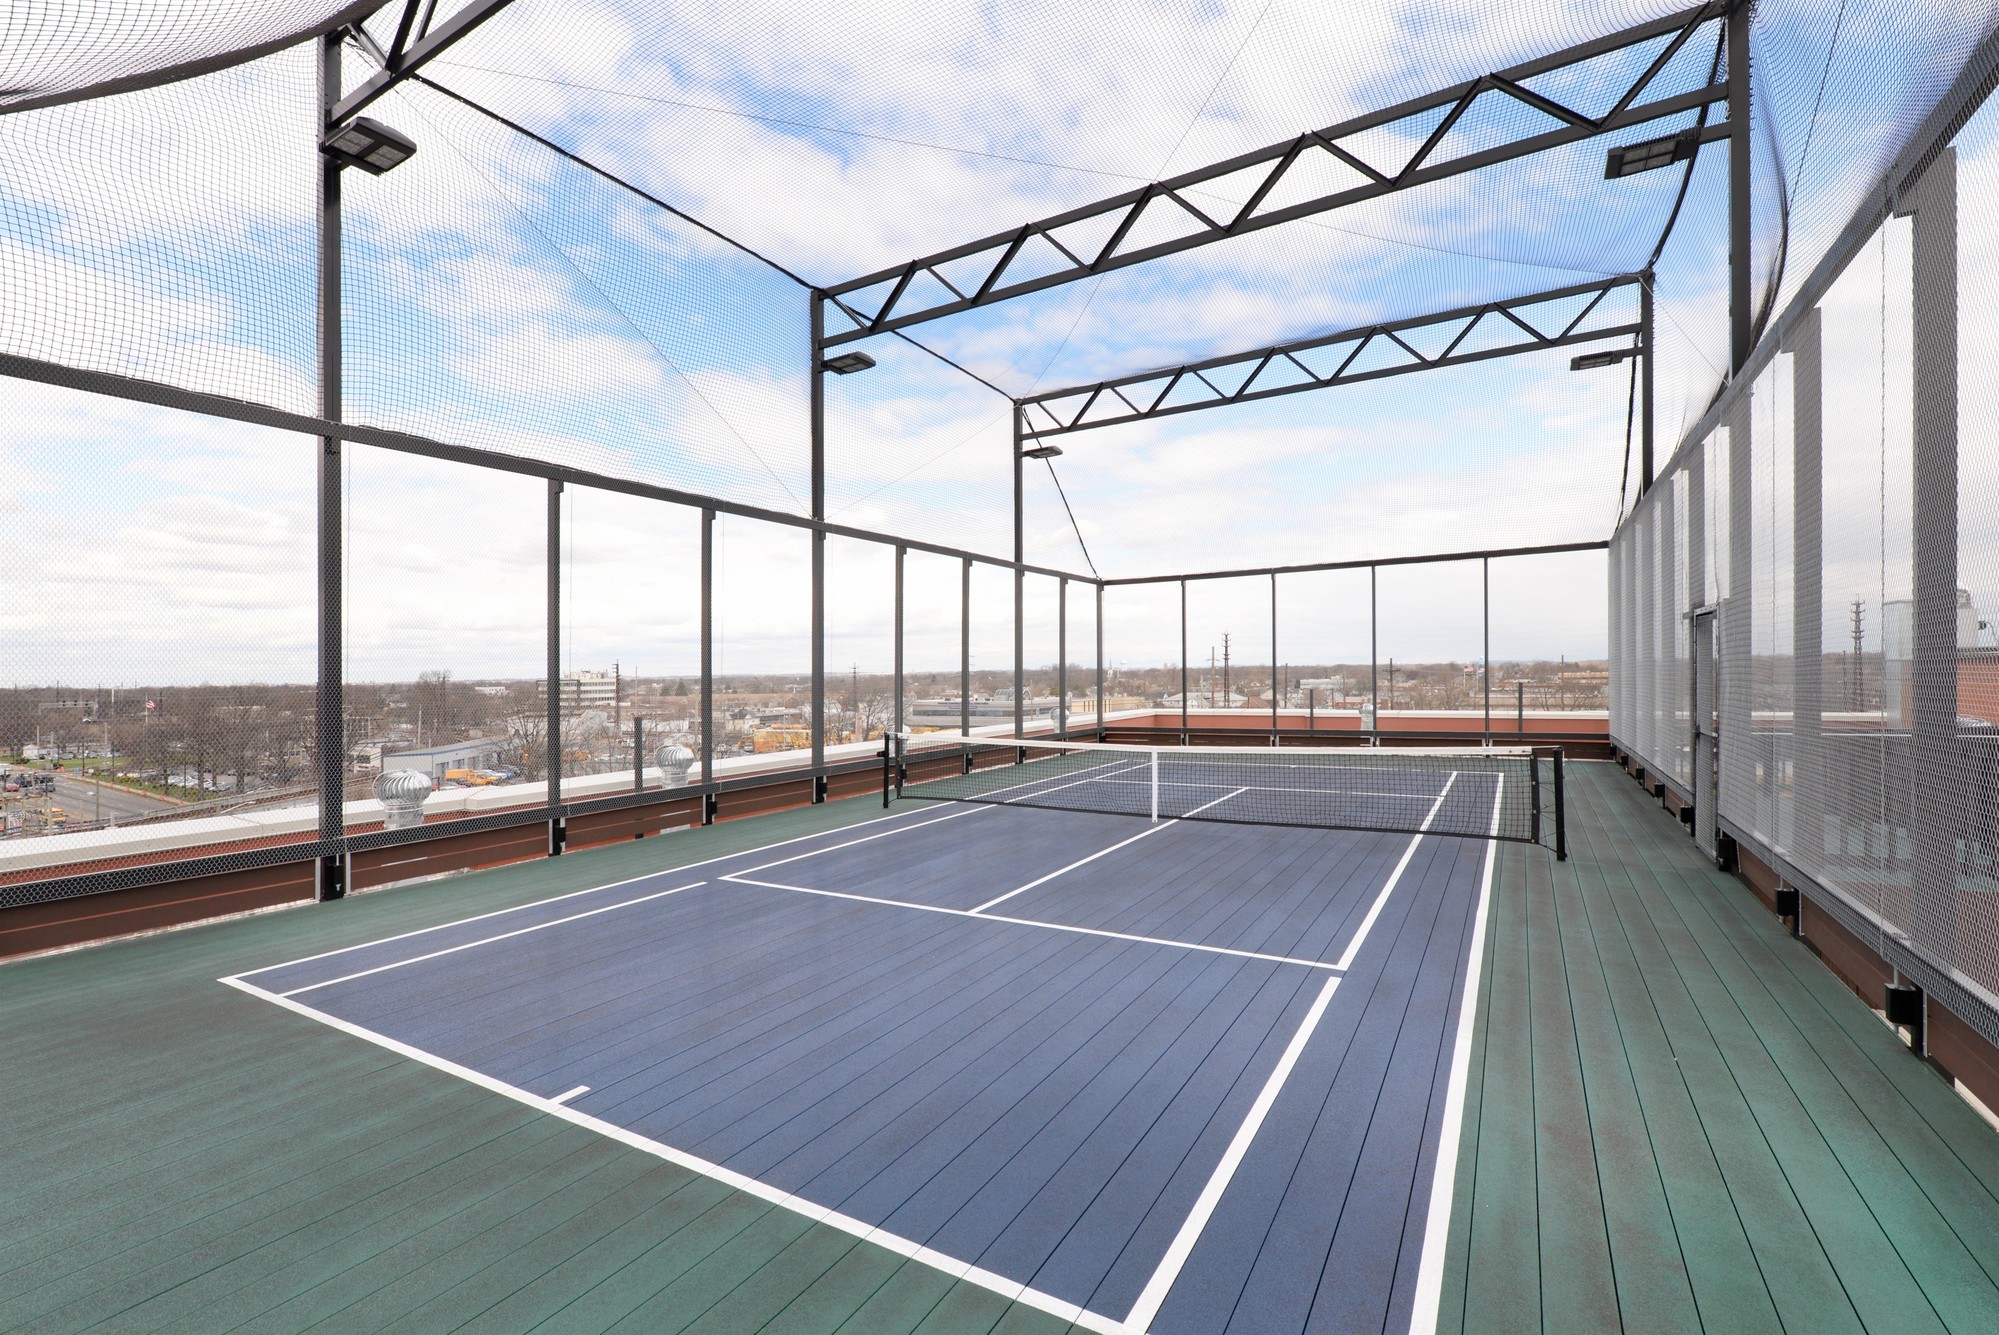 The rooftop tennis court at the Sun Valley Towers.